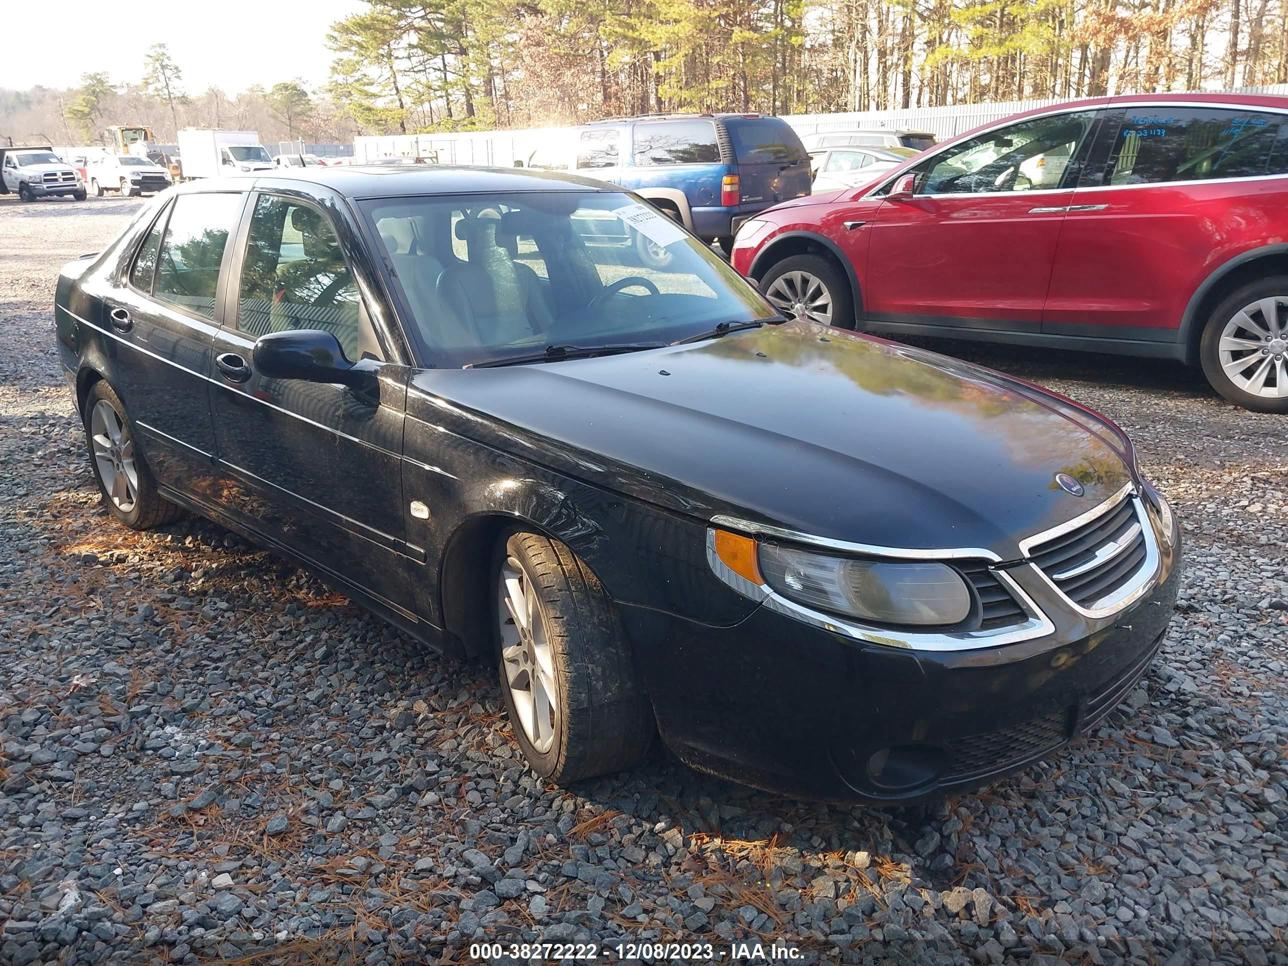 vin: YS3EH49G273502371 YS3EH49G273502371 2007 saab 9-5 2300 for Sale in 07751, 426 Texas Road, Morganville, New Jersey, USA